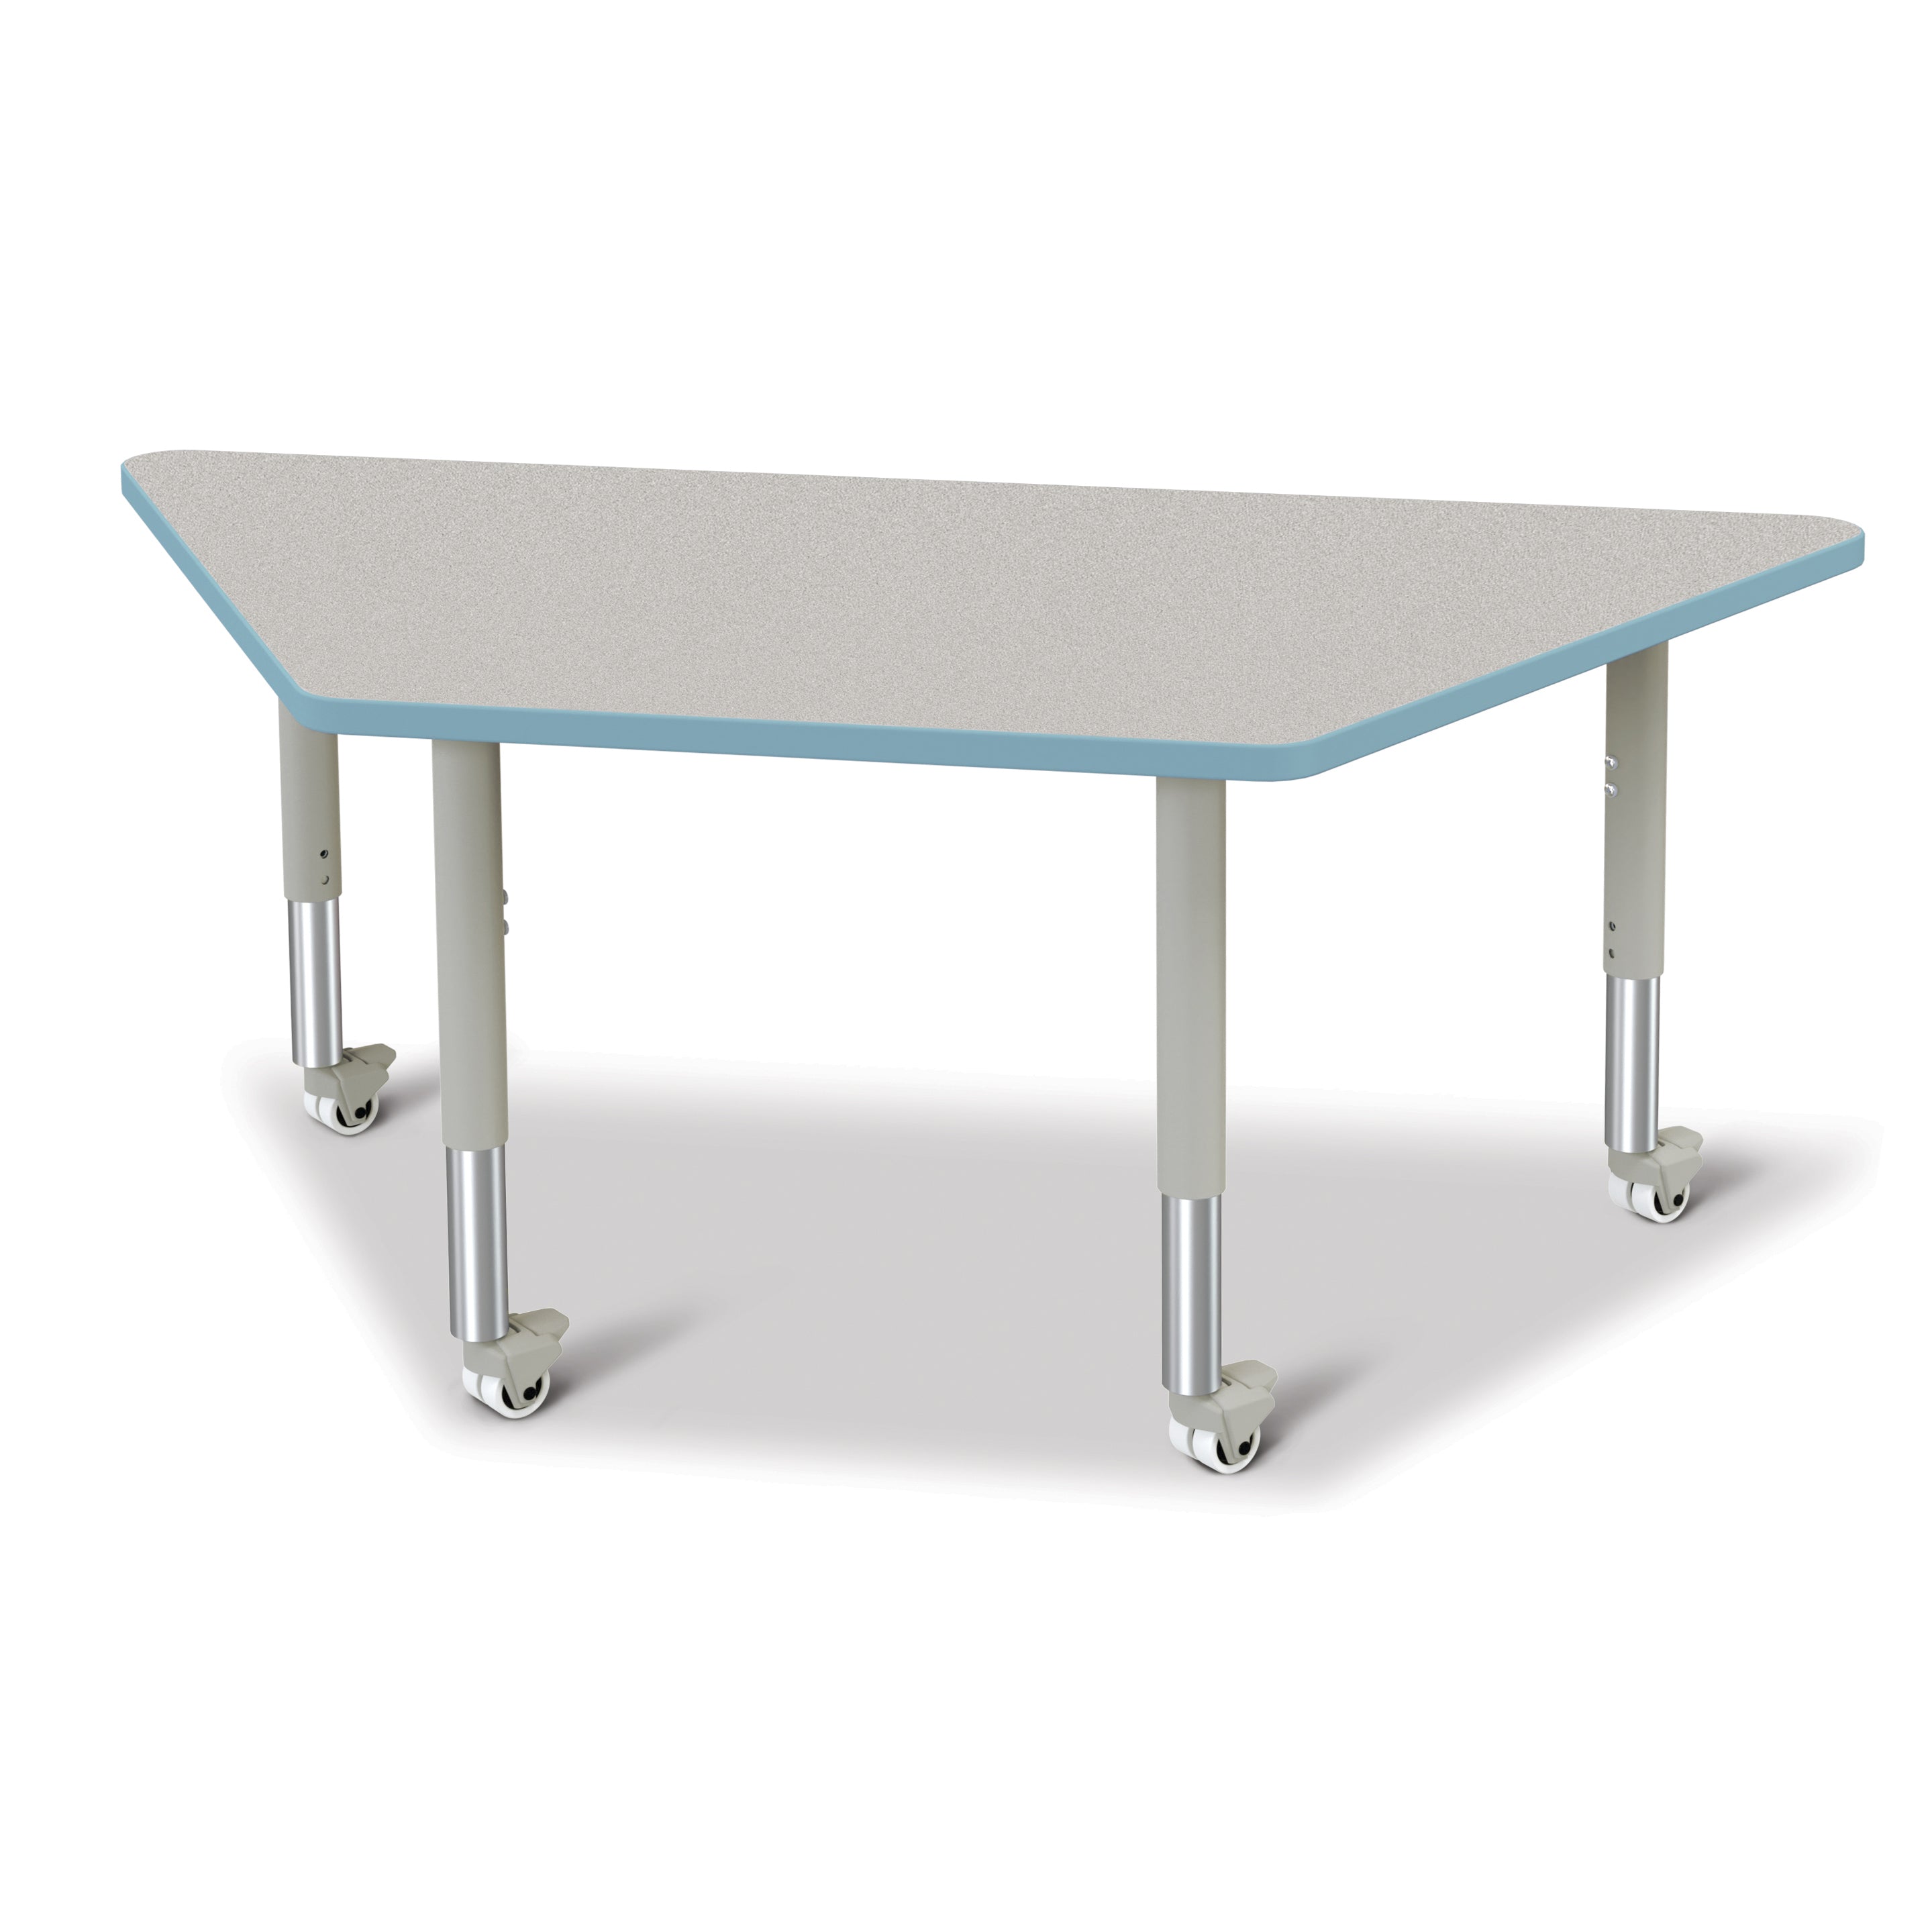 6443JCM131, Berries Trapezoid Activity Tables - 30" X 60", Mobile - Freckled Gray/Coastal Blue/Gray